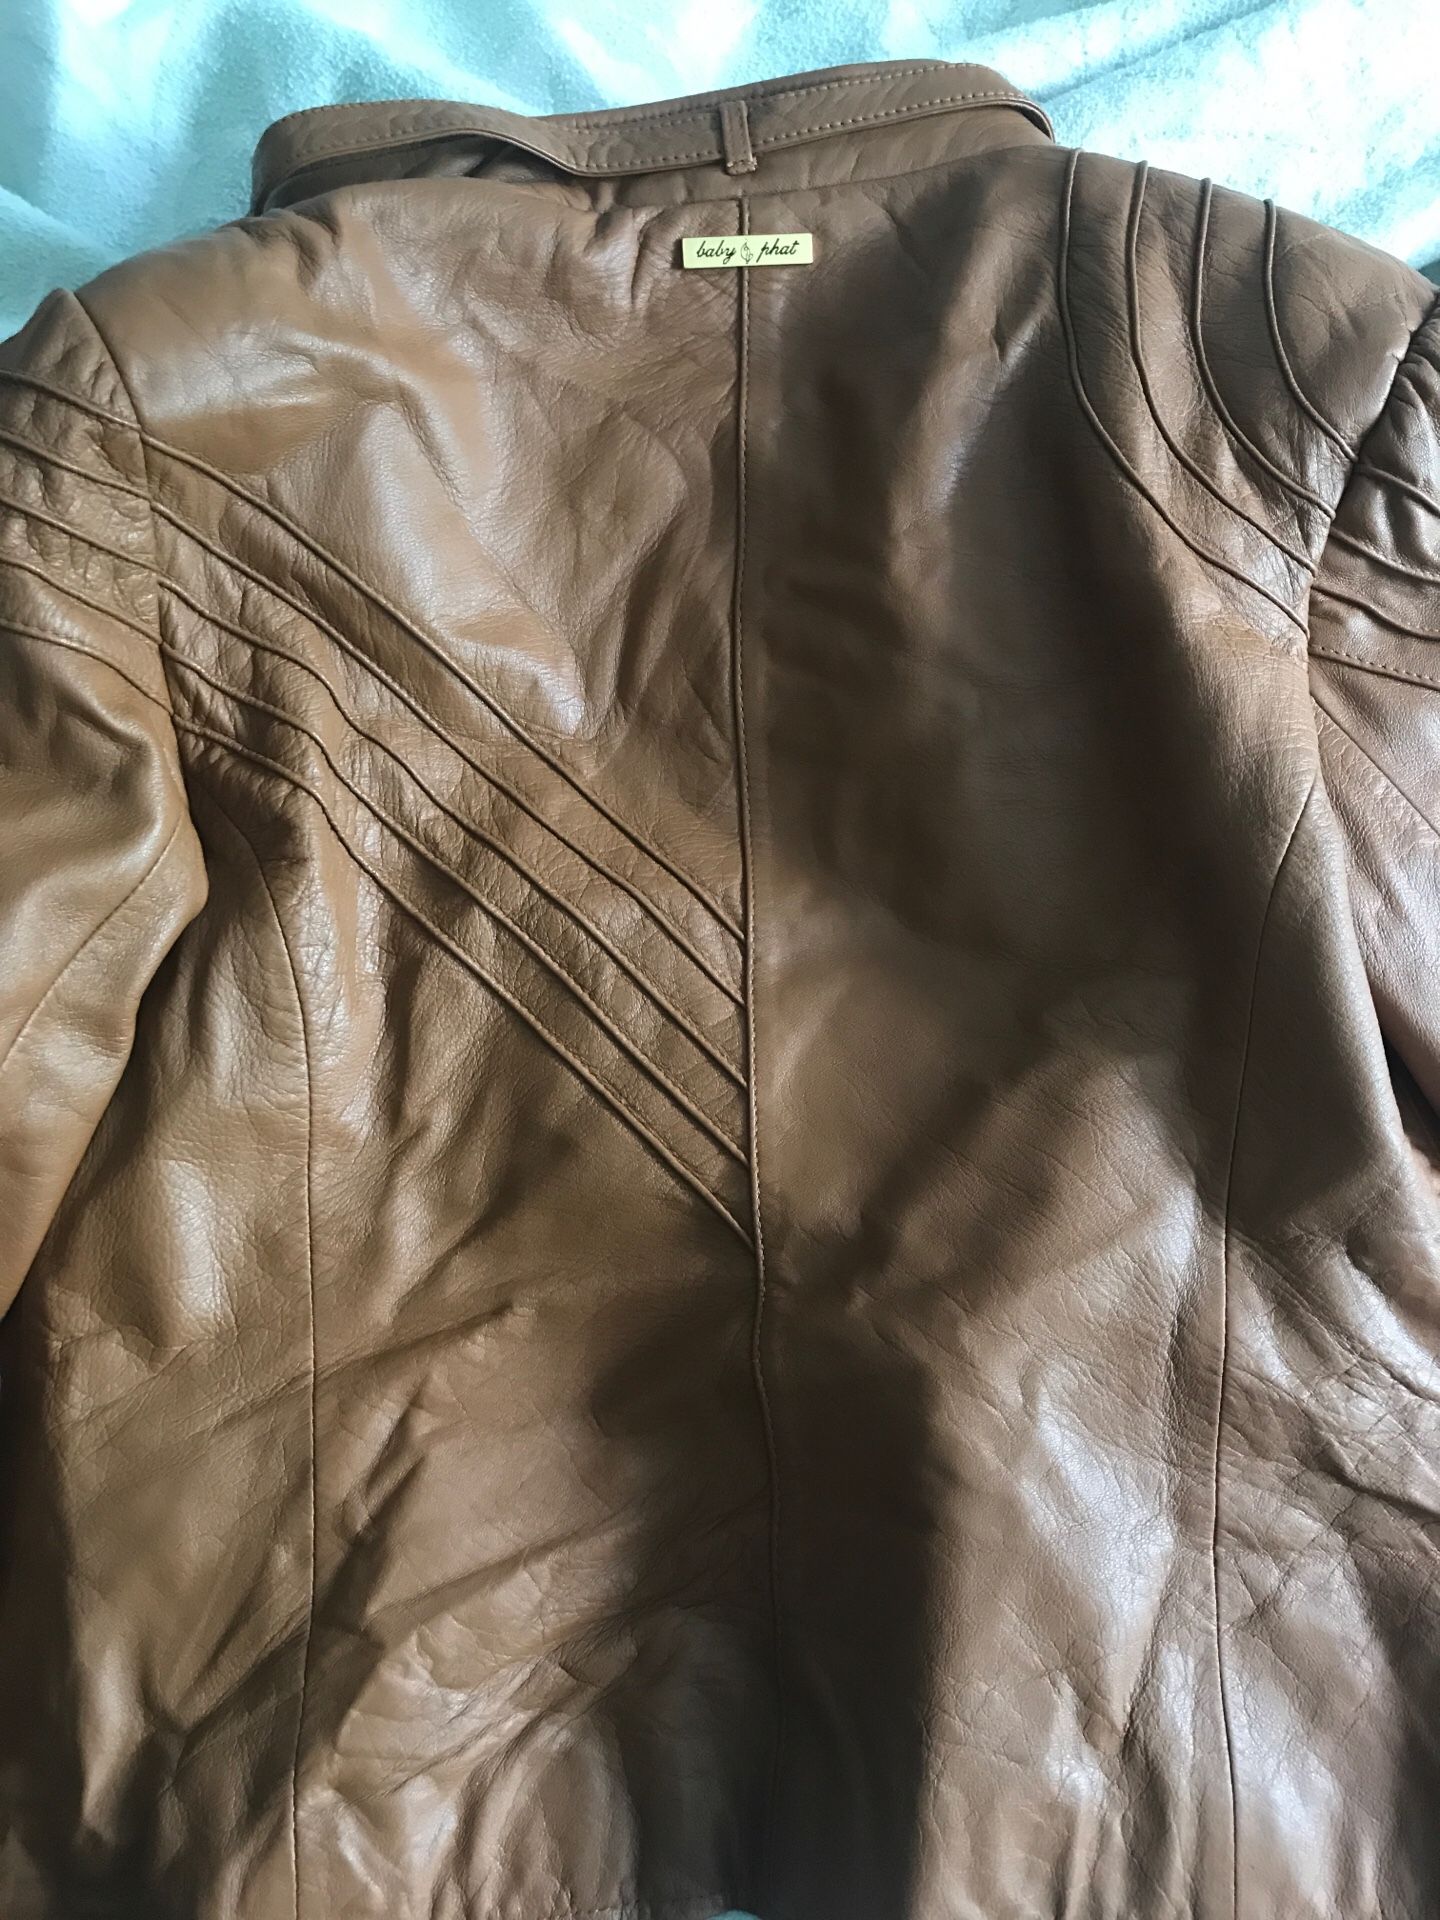 Real leather jacket - Size L